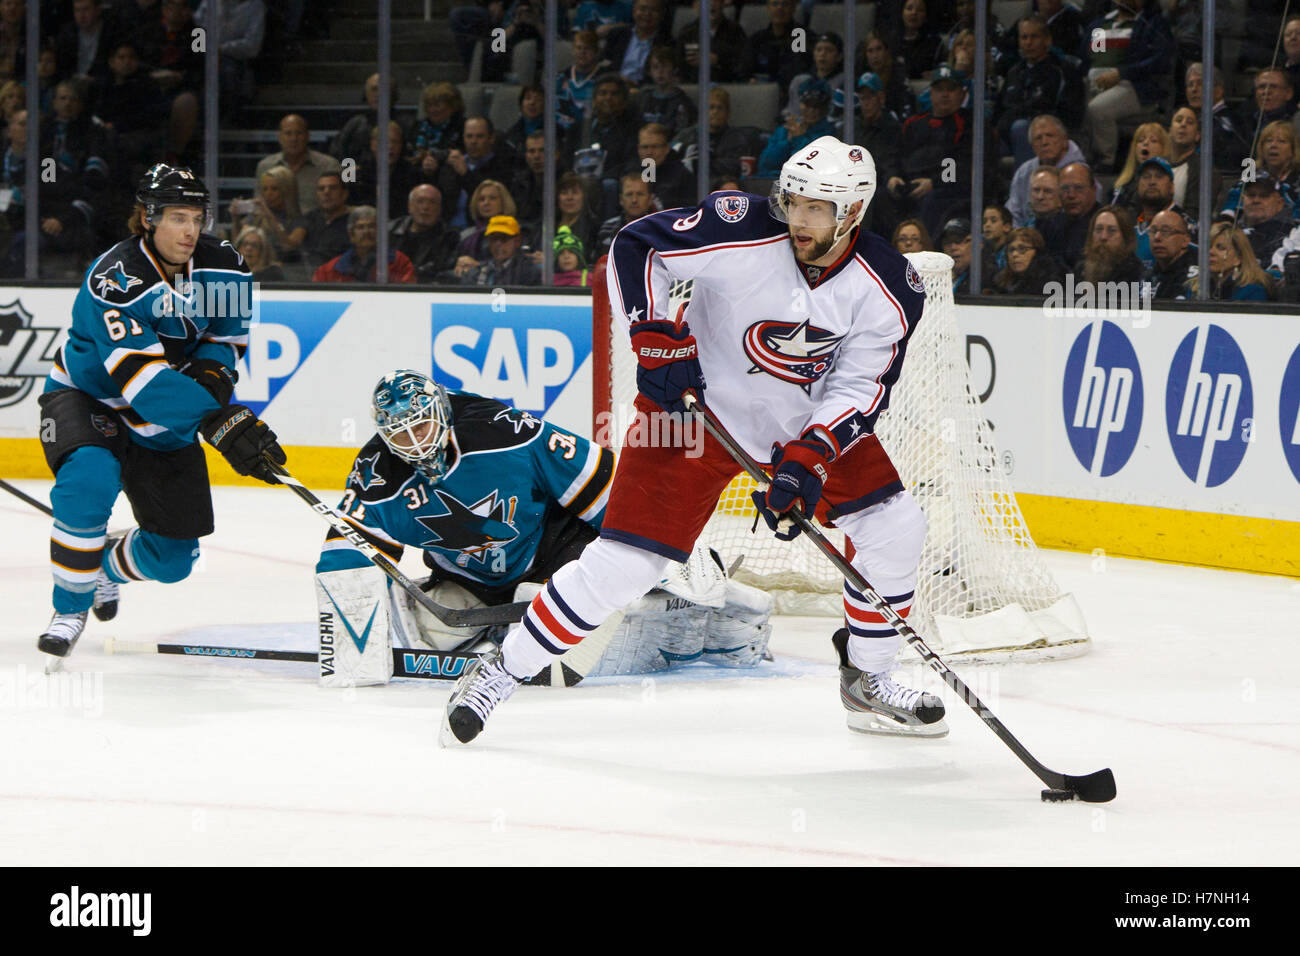 Jan 31, 2012; San Jose, CA, USA; Columbus Blue Jackets left wing Colton Gillies (9) skates with the puck in front of San Jose Sharks goalie Antti Niemi (31) and defenseman Justin Braun (61) during the first period at HP Pavilion. San Jose defeated Columbus 6-0. Stock Photo